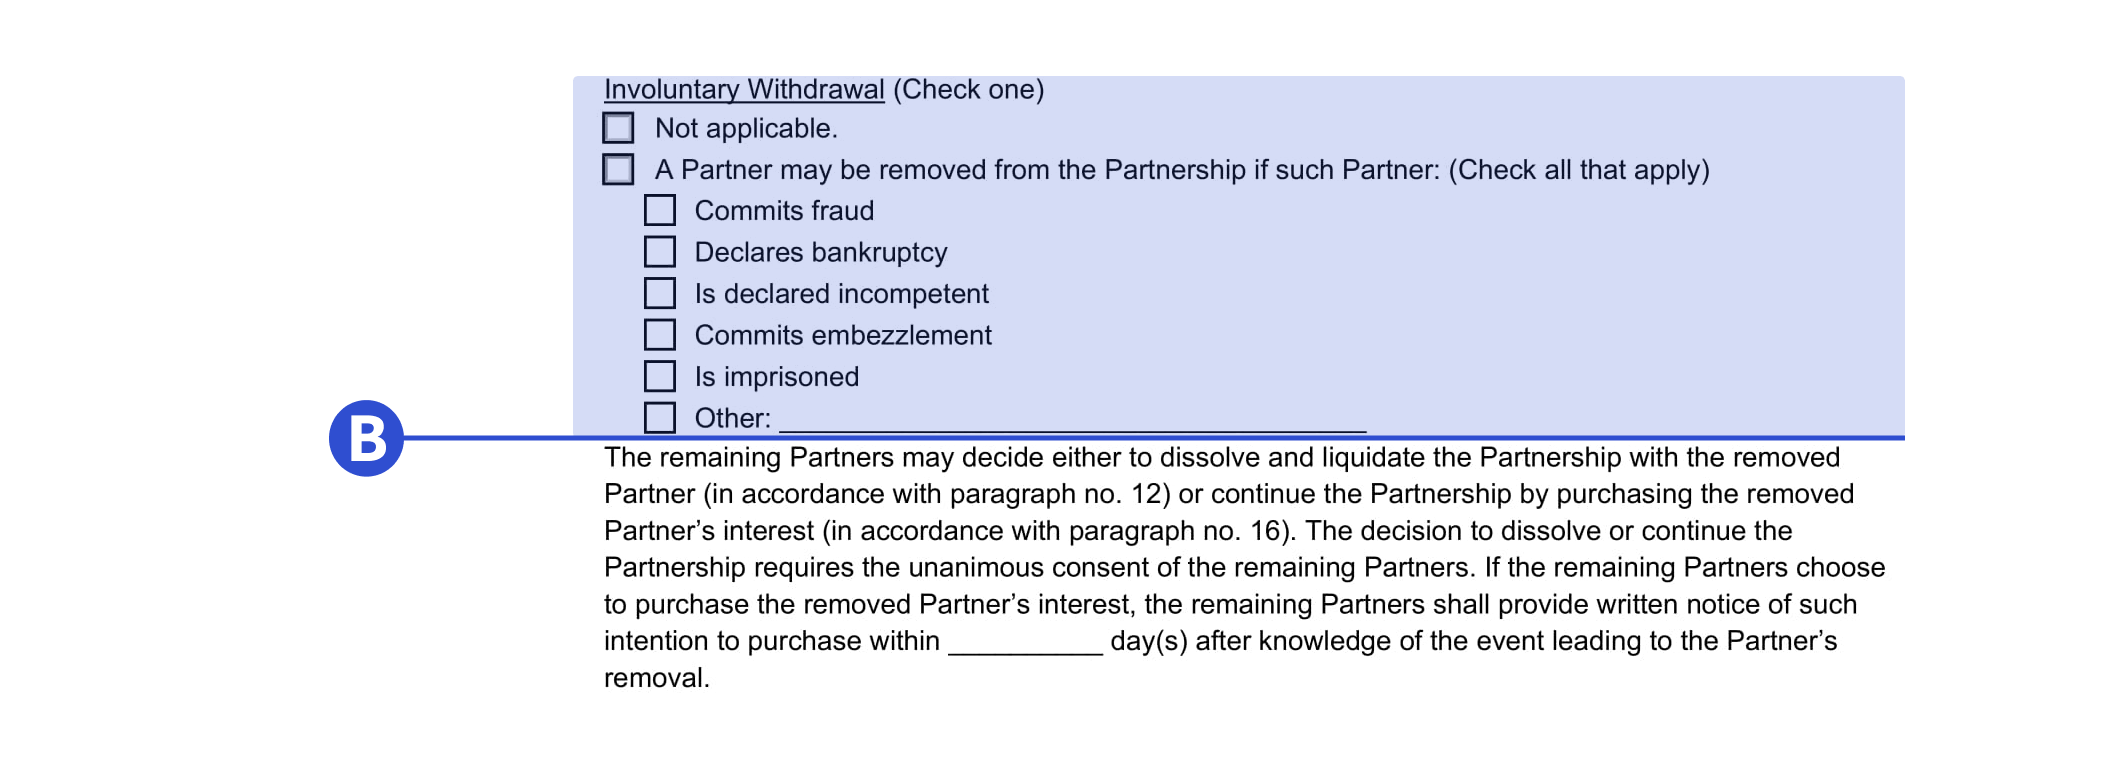 Where to include involuntary withdrawal details in our template.